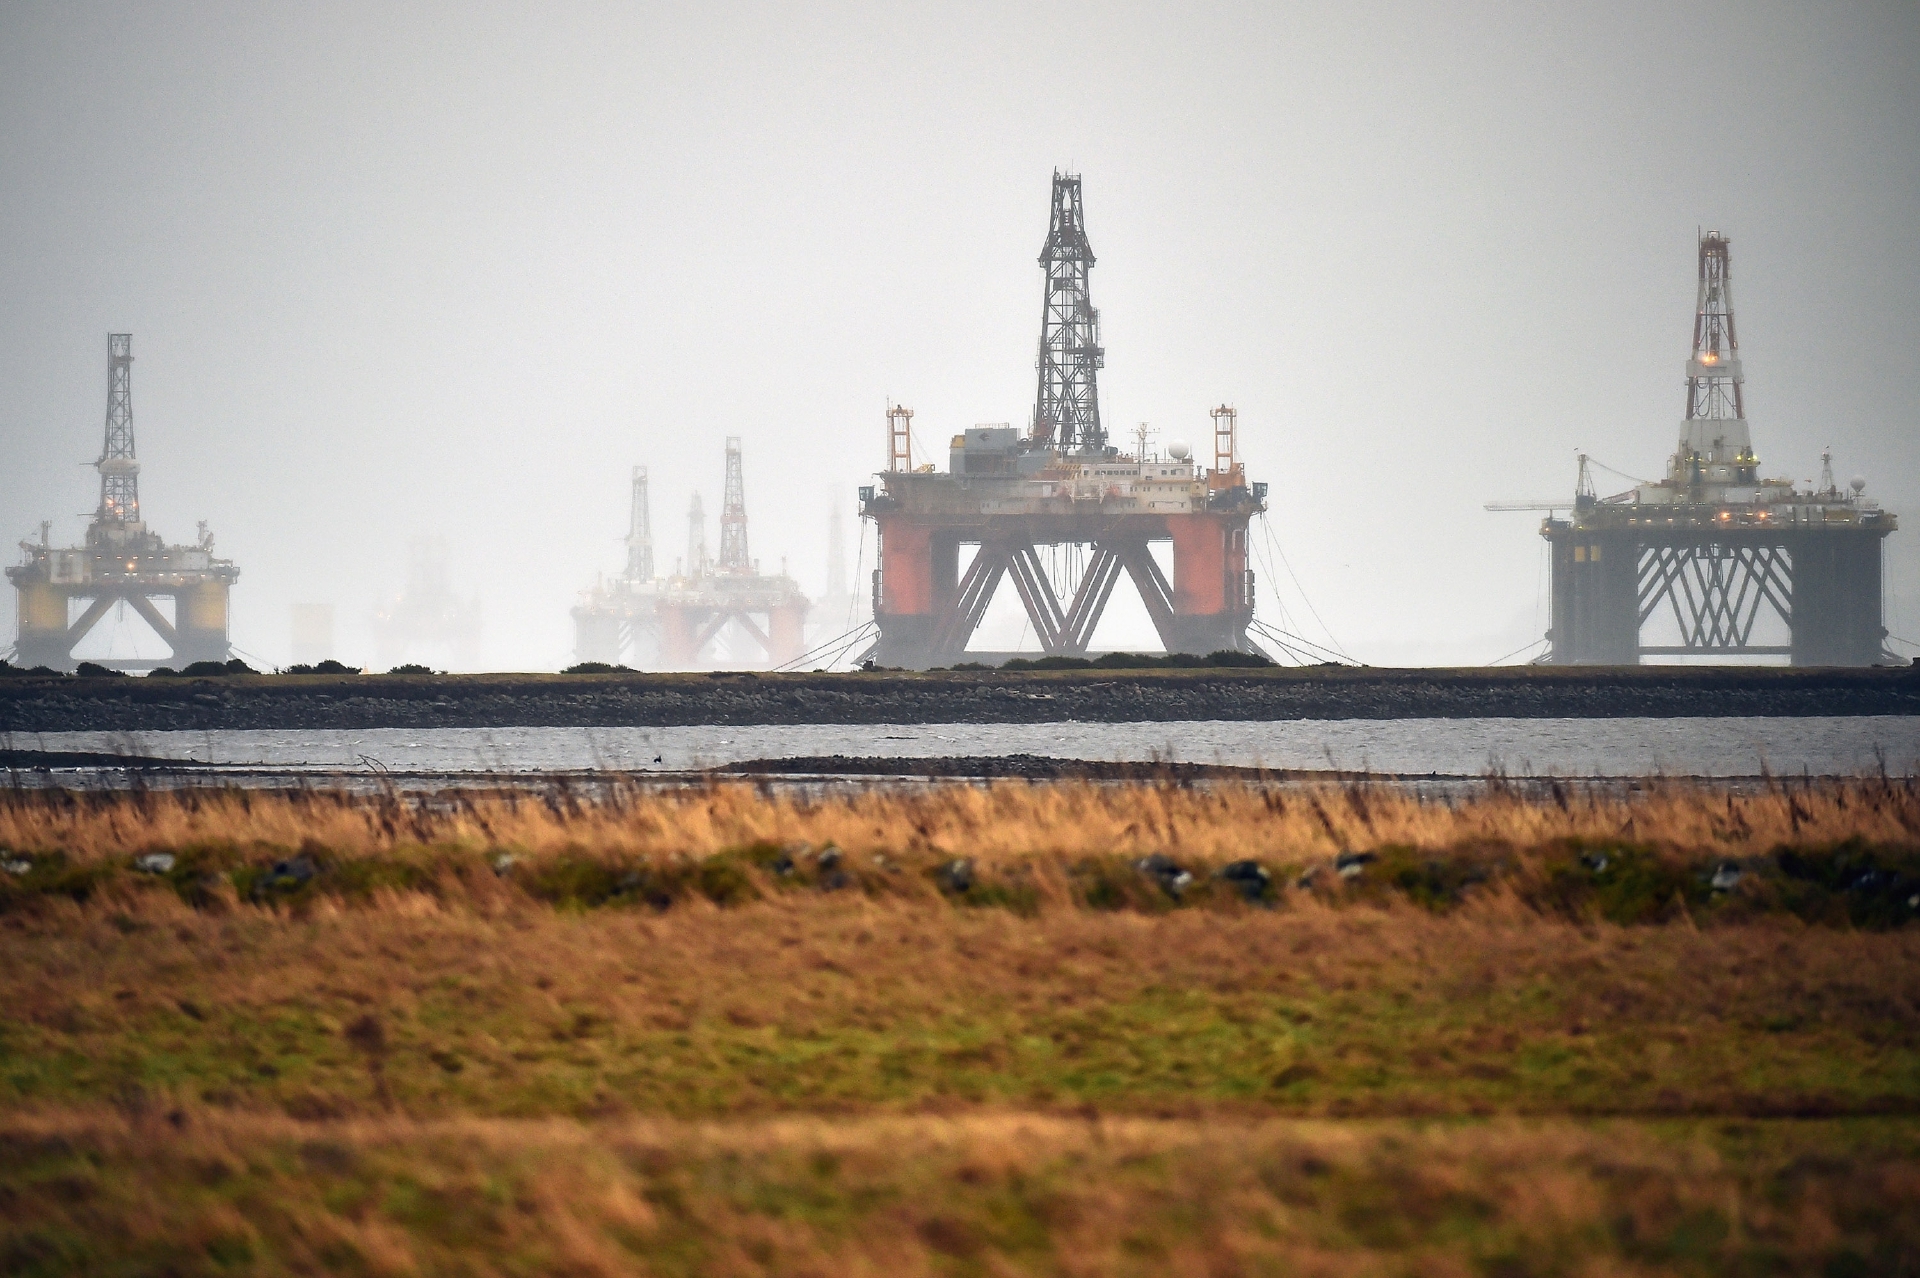 The oil price plunge has severely affected the North Sea industry.